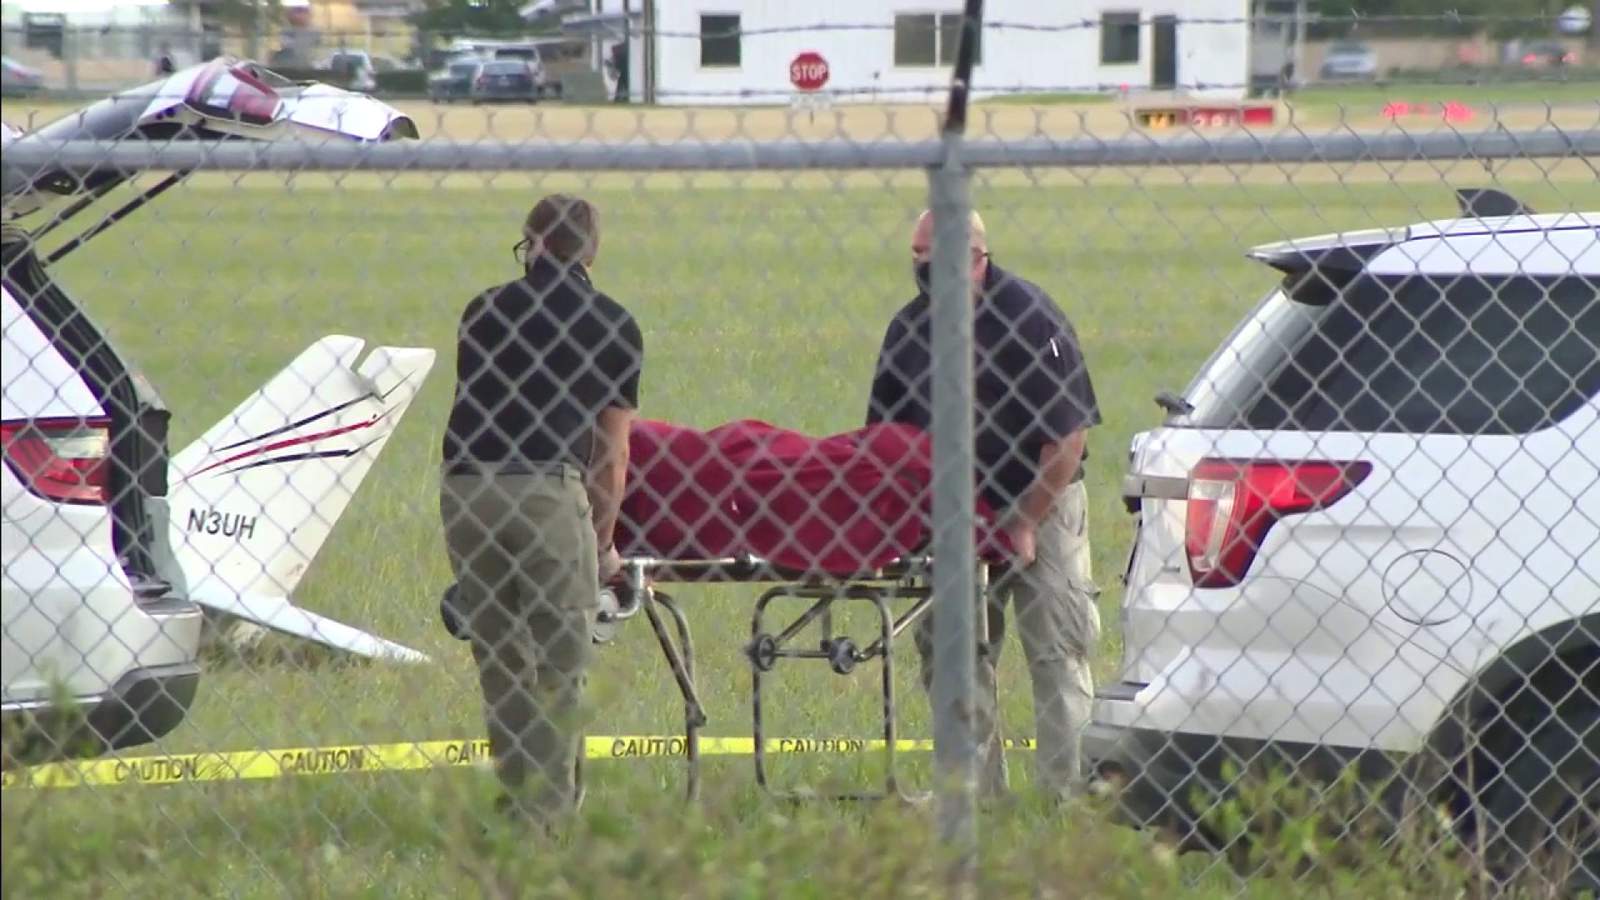 Body of pilot, plane wreckage removed from North Perry Airport as investigation into deadly crash continues